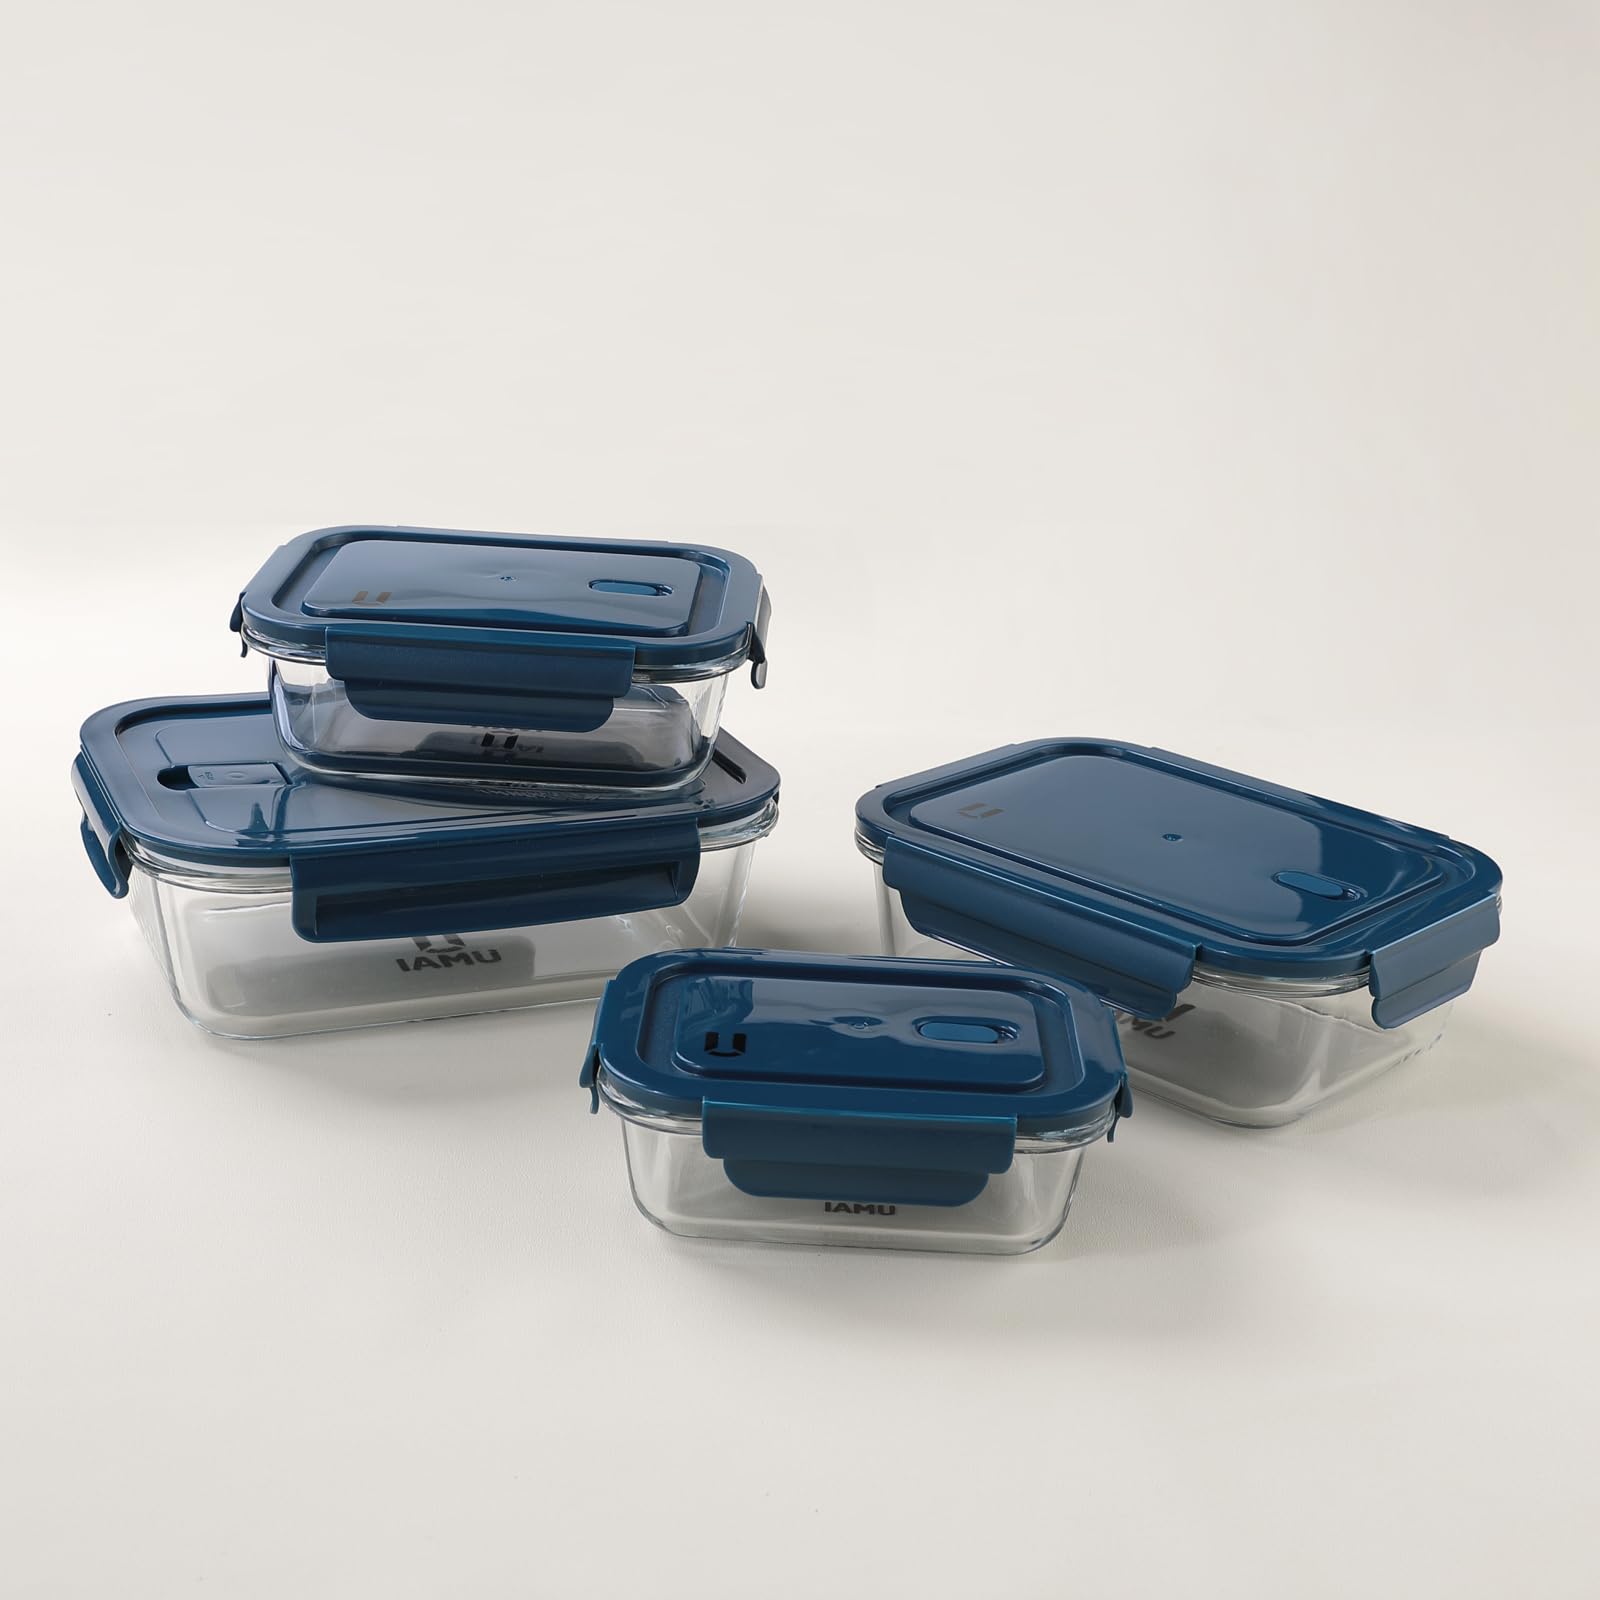 The Better Home Borosilicate Glass Containers with Lid - Glass Lunch Box with Air Vent Lid, Kitchen Containers Set - Microwave & Freezer Safe, Leak Proof, Stackable Design, Set of 4 (Rectangular)